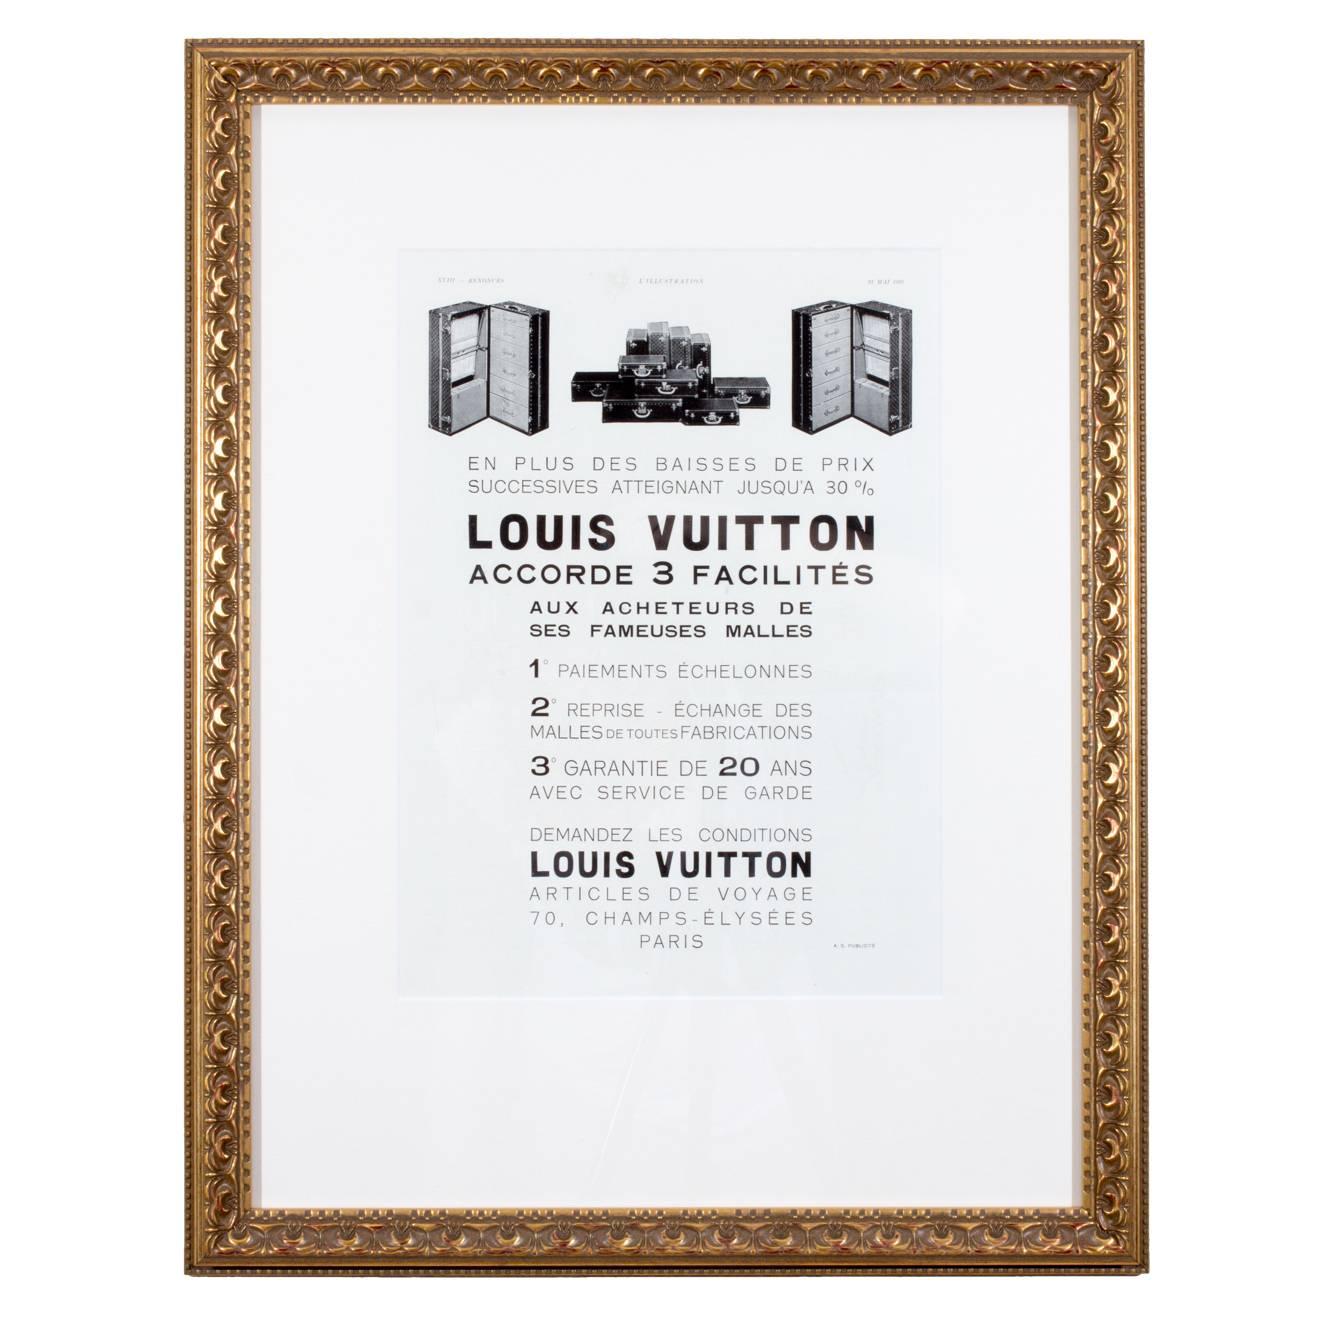 Original French Louis Vuitton Luggage Print Ad Framed from the 1930's